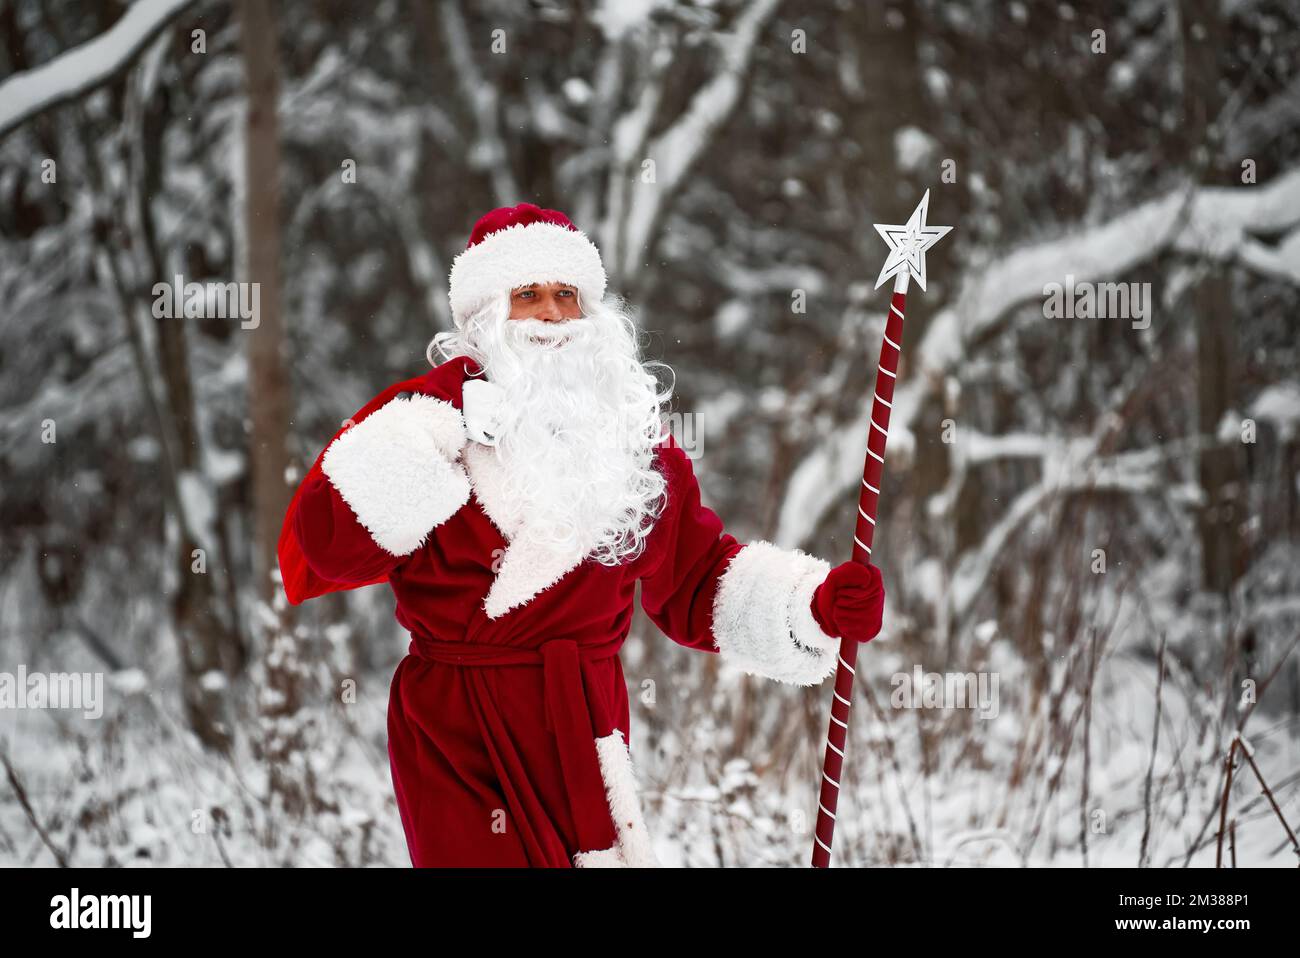 Santa Claus with bag of Christmas gifts is walking in snow forest. Stock Photo